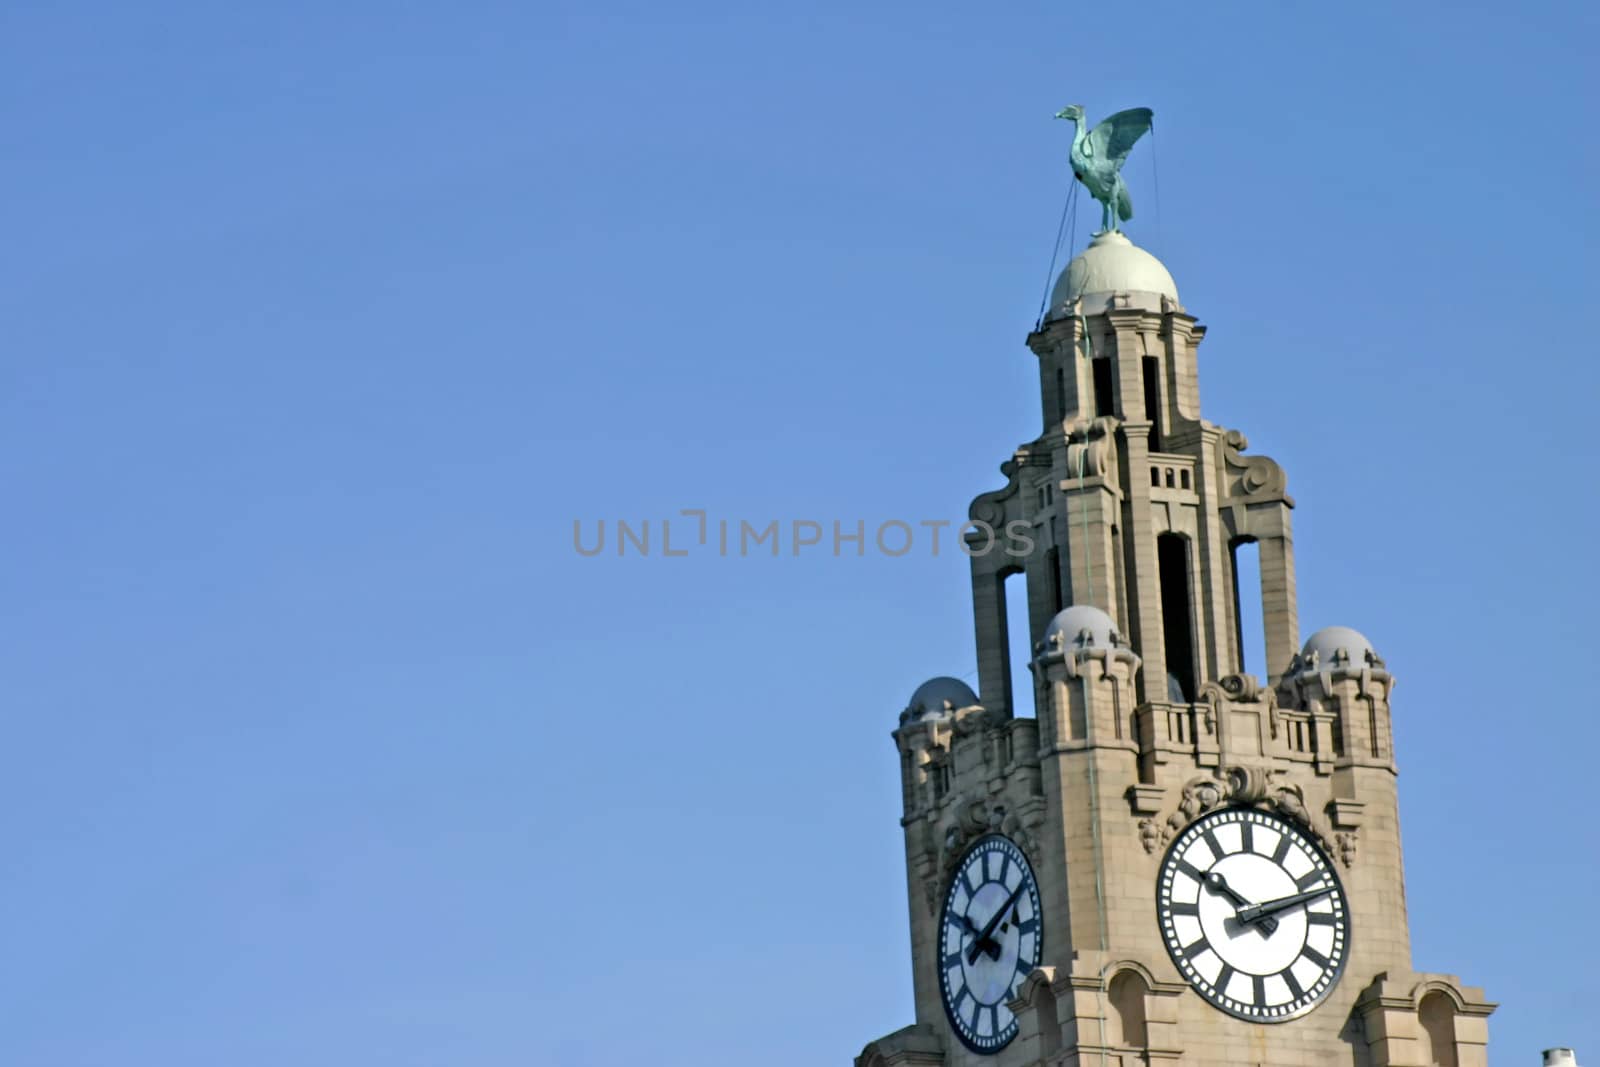 Liver Building in Liverpool by green308